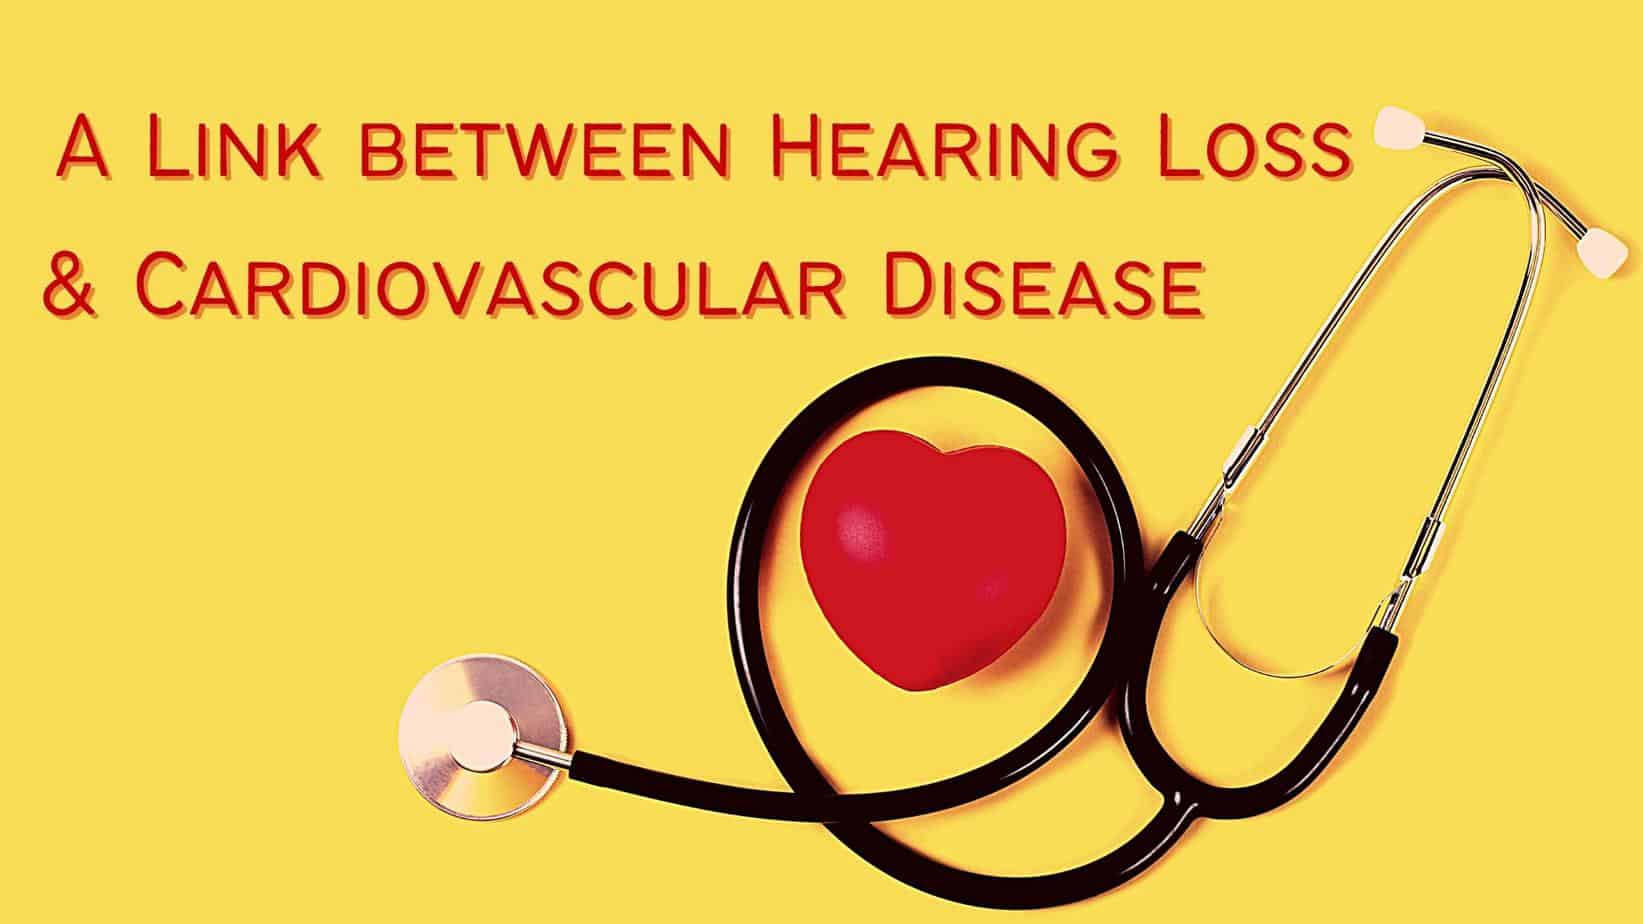 linked between hearing loss and cardiovascular disease